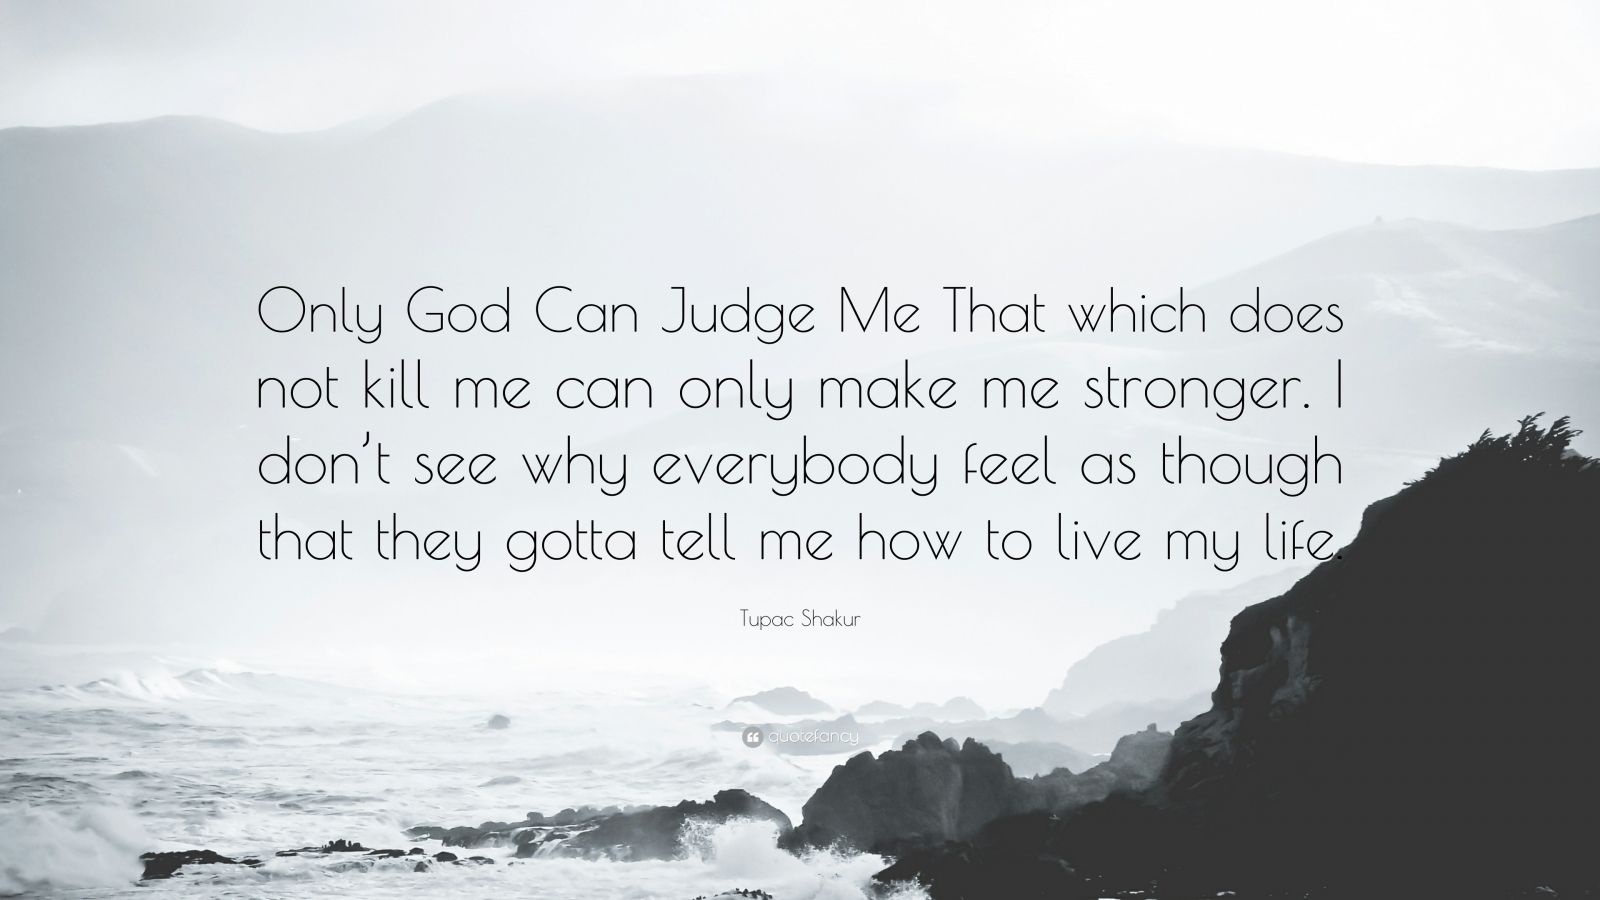 2pac only god can judge me wqllpqperss